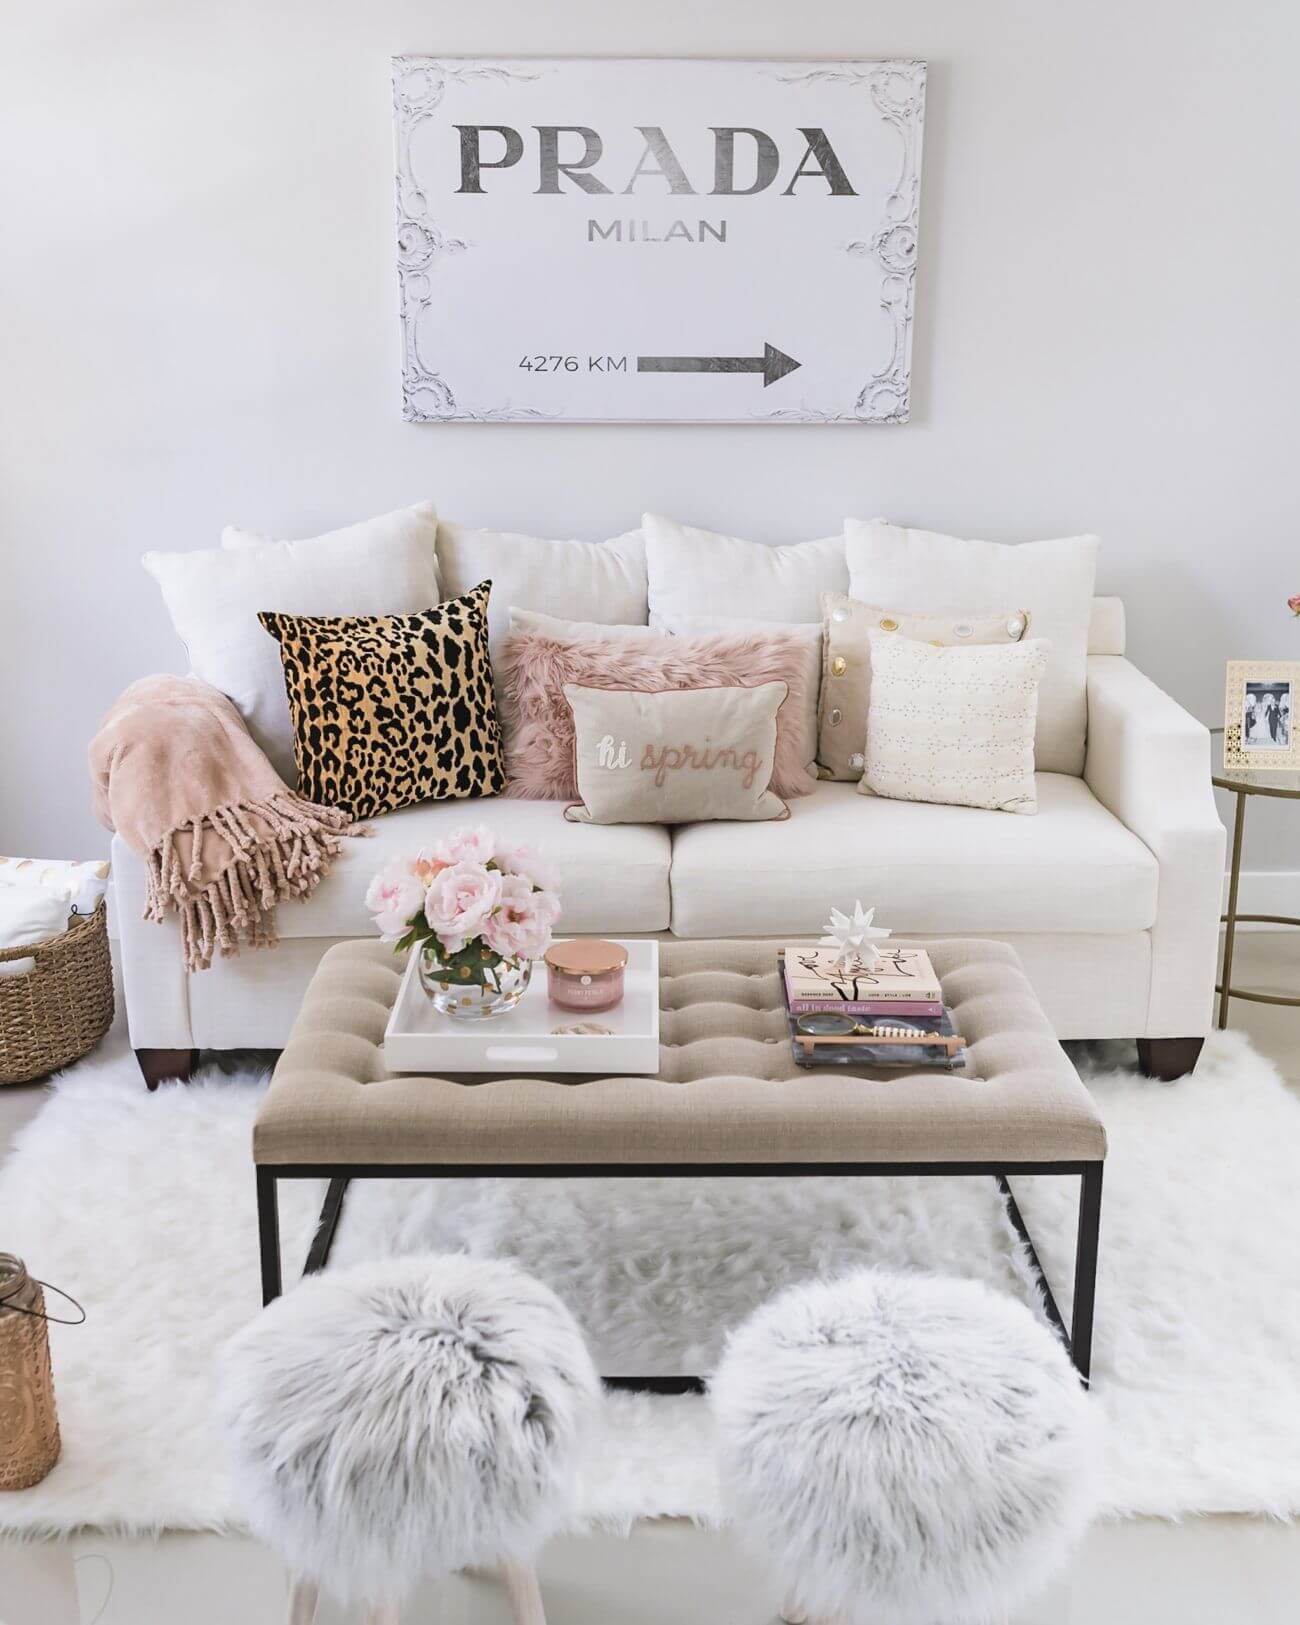 Light and Airy Color Scheme with Textures